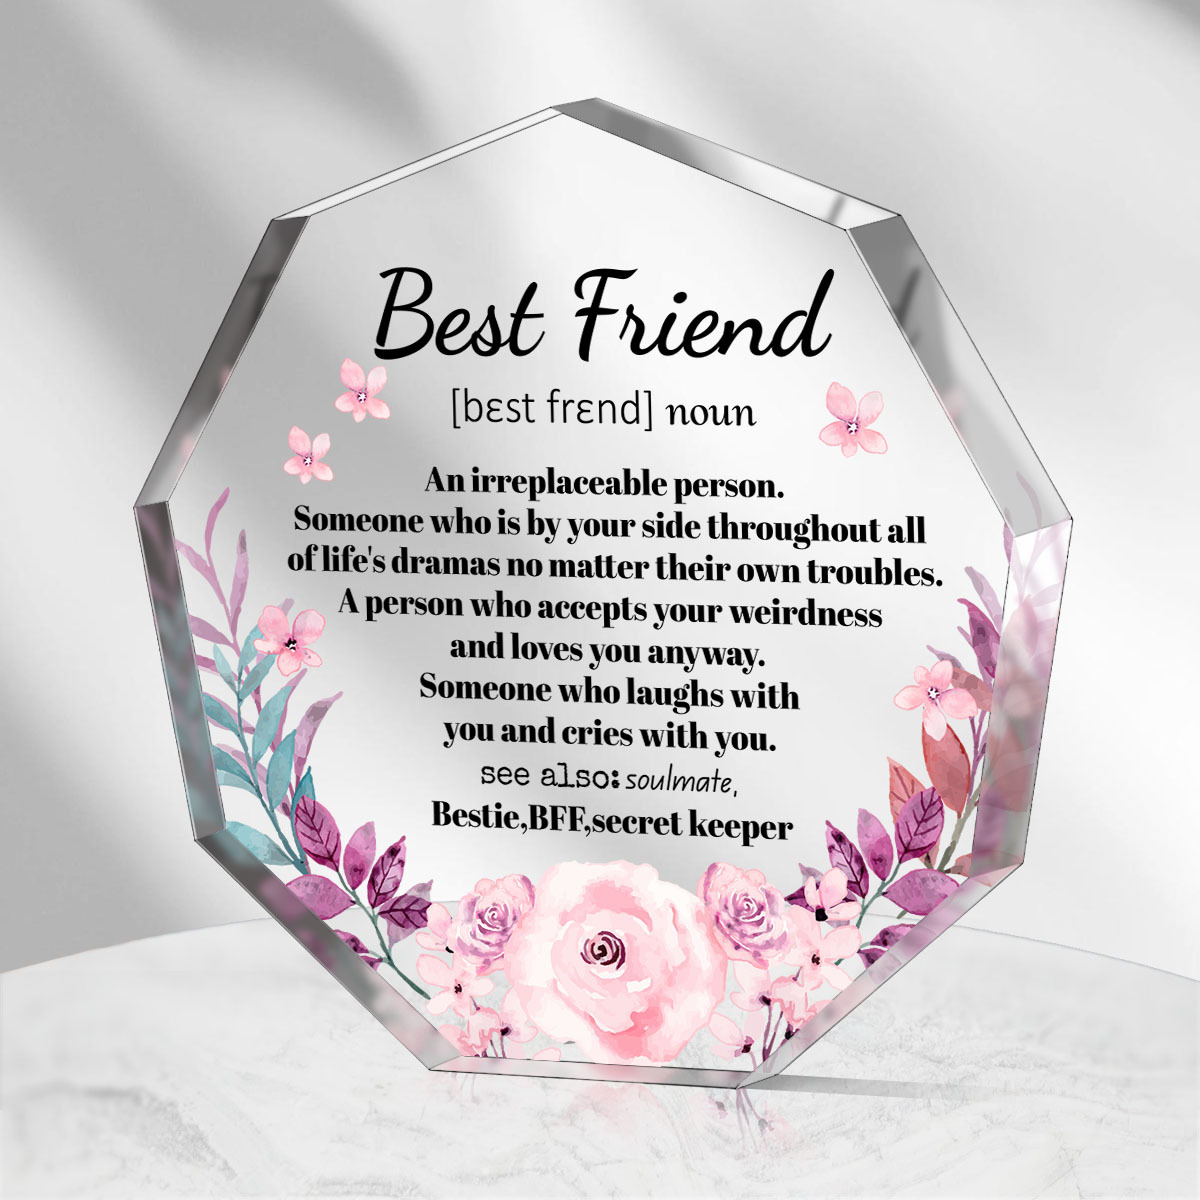 Gifts for Best Friend, Friendship Gifts for Women Friends - Best Friend  Birthday Gifts for Women - Friend Gifts for Women - Birthday Gifts for Women